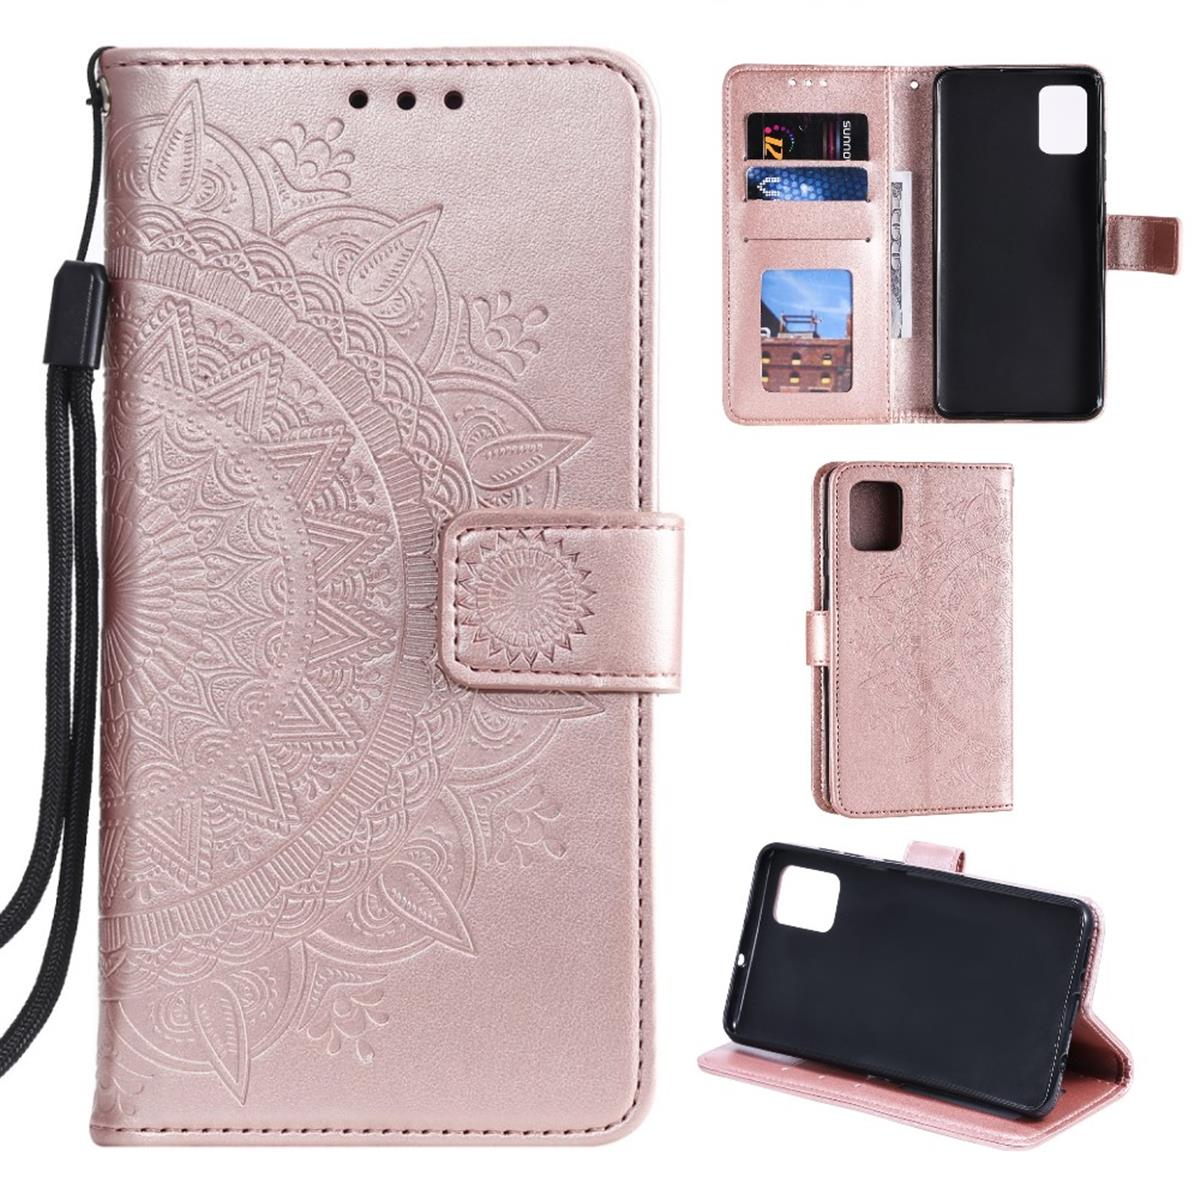 COVERKINGZ Klapphülle mit Mandala Muster, Samsung, Bookcover, A51, Roségold Galaxy